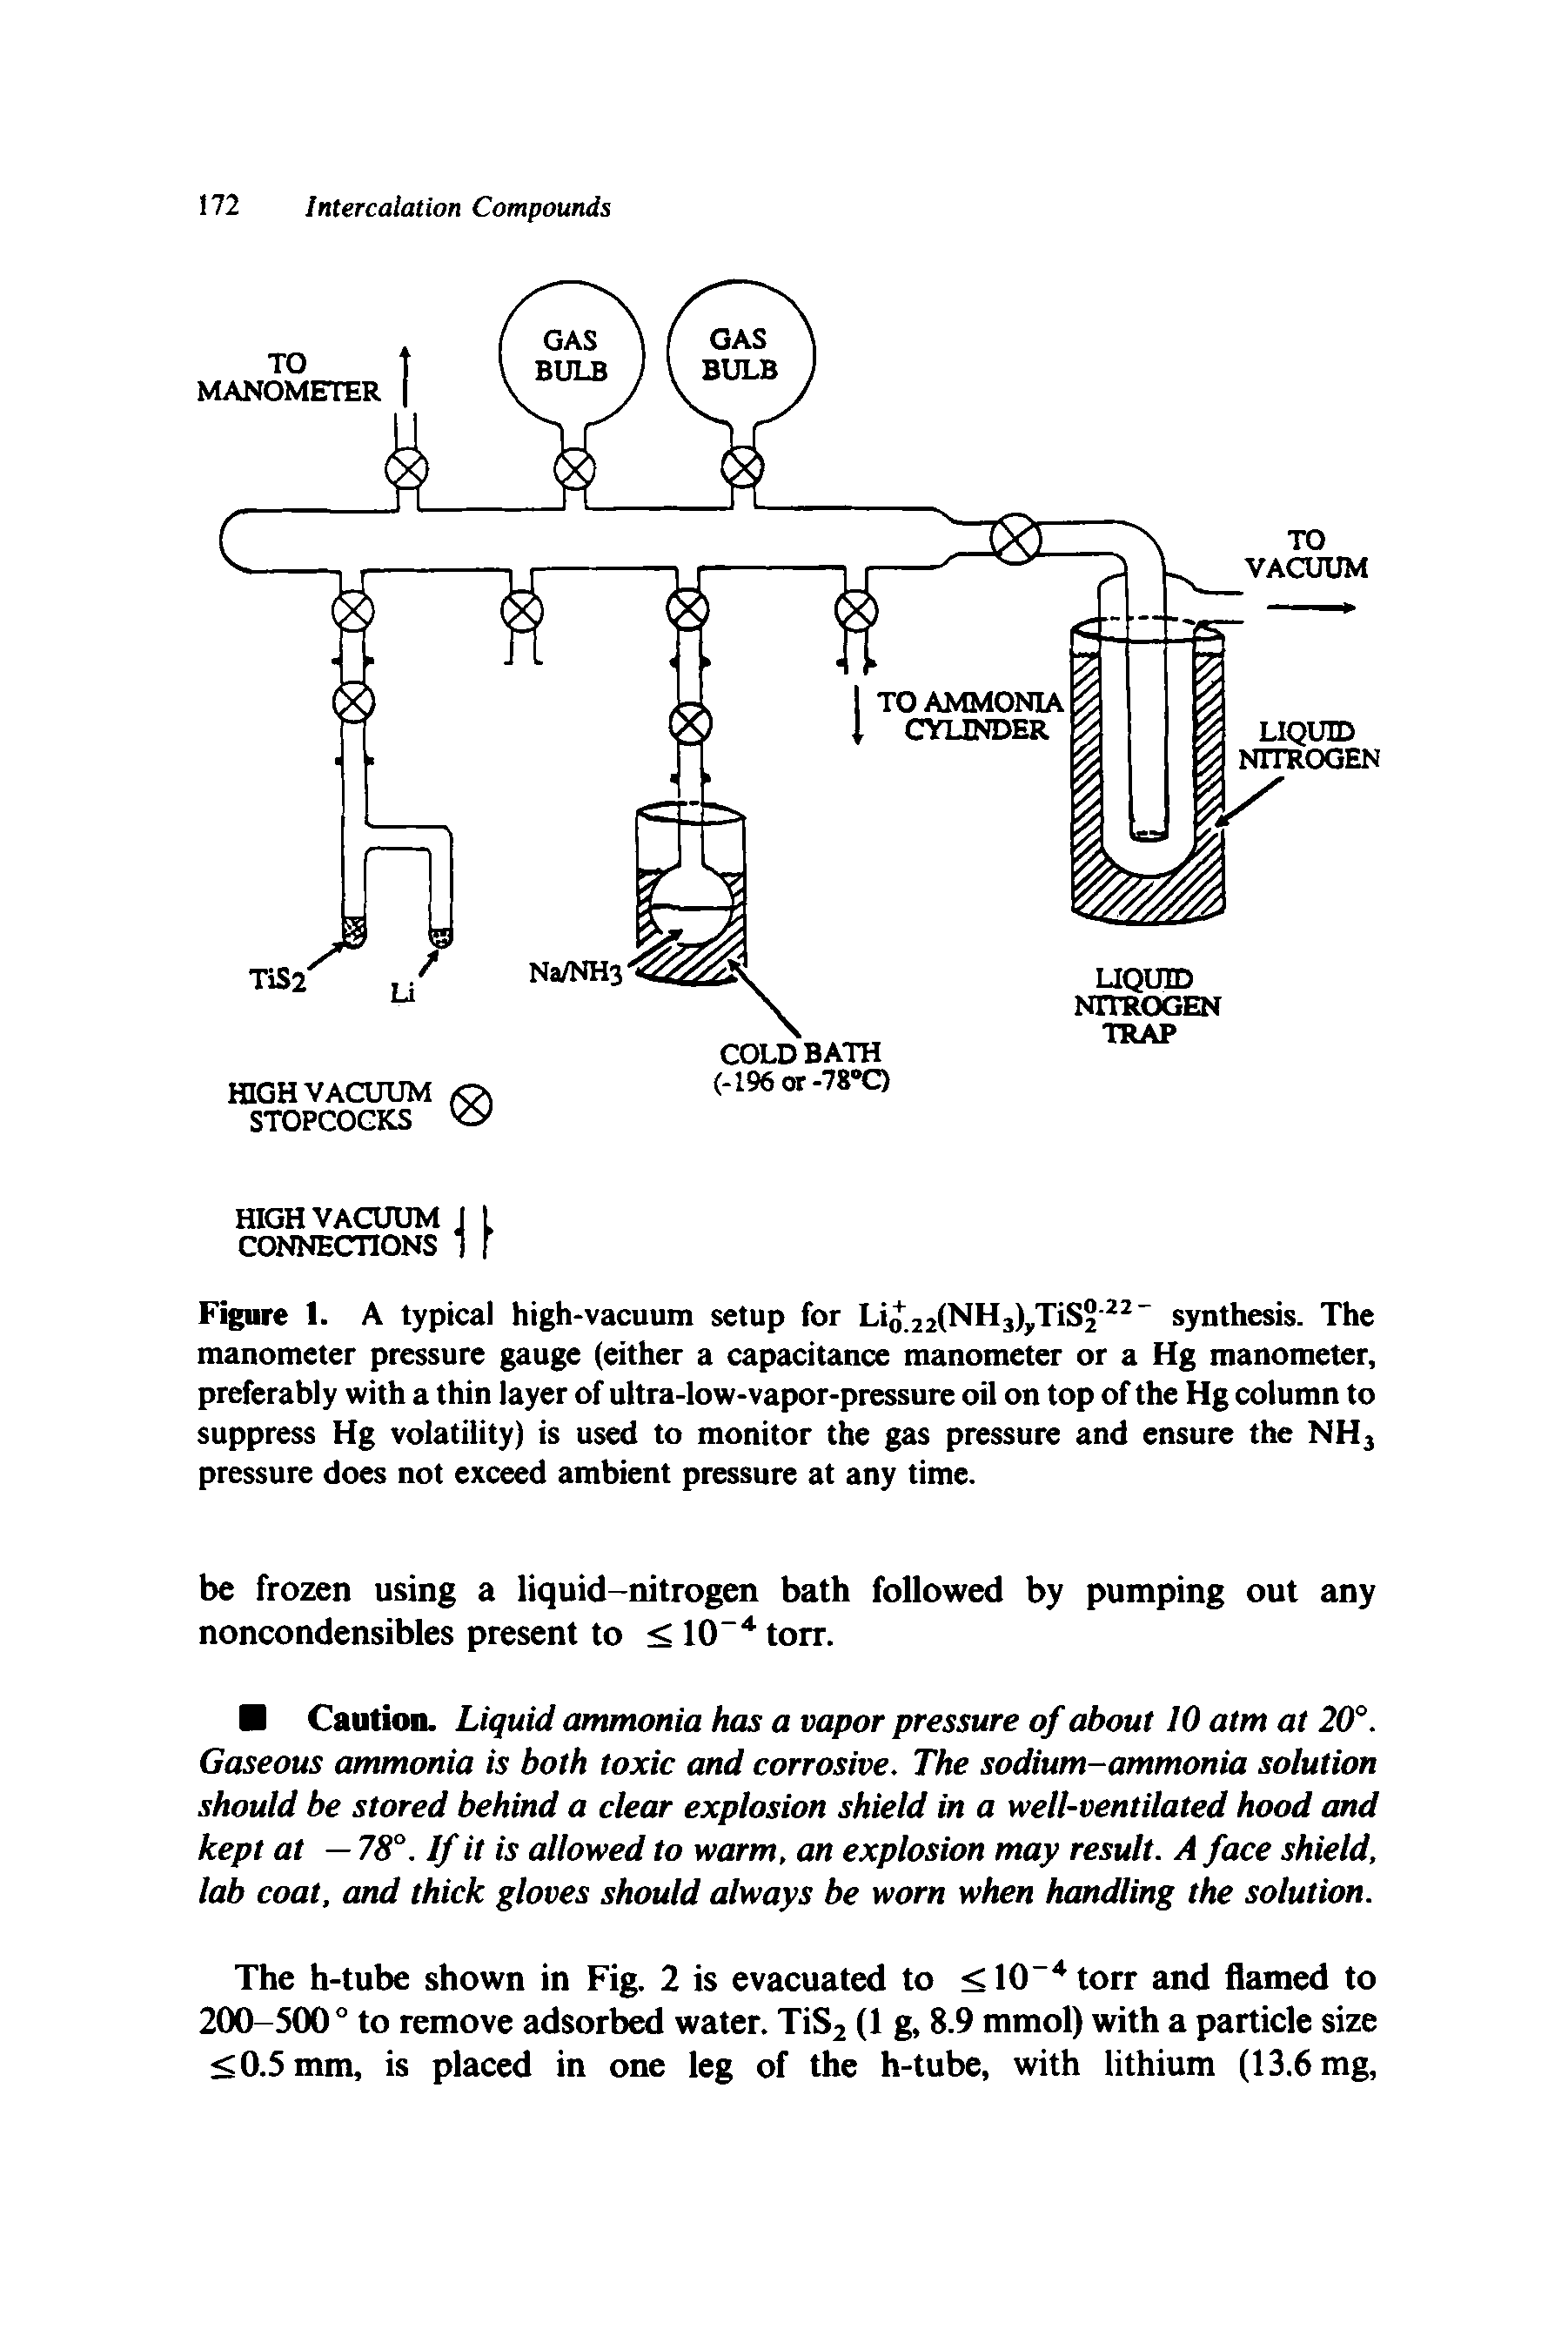 Figure I. A typical high-vacuum setup for Li. 22(NHj),TiS5- " synthesis. The manometer pressure gauge (either a capacitance manometer or a Hg manometer, preferably with a thin layer of ultra-low-vapor-pressure oil on top of the Hg column to suppress Hg volatility) is used to monitor the gas pressure and ensure the NH3 pressure does not exceed ambient pressure at any time.